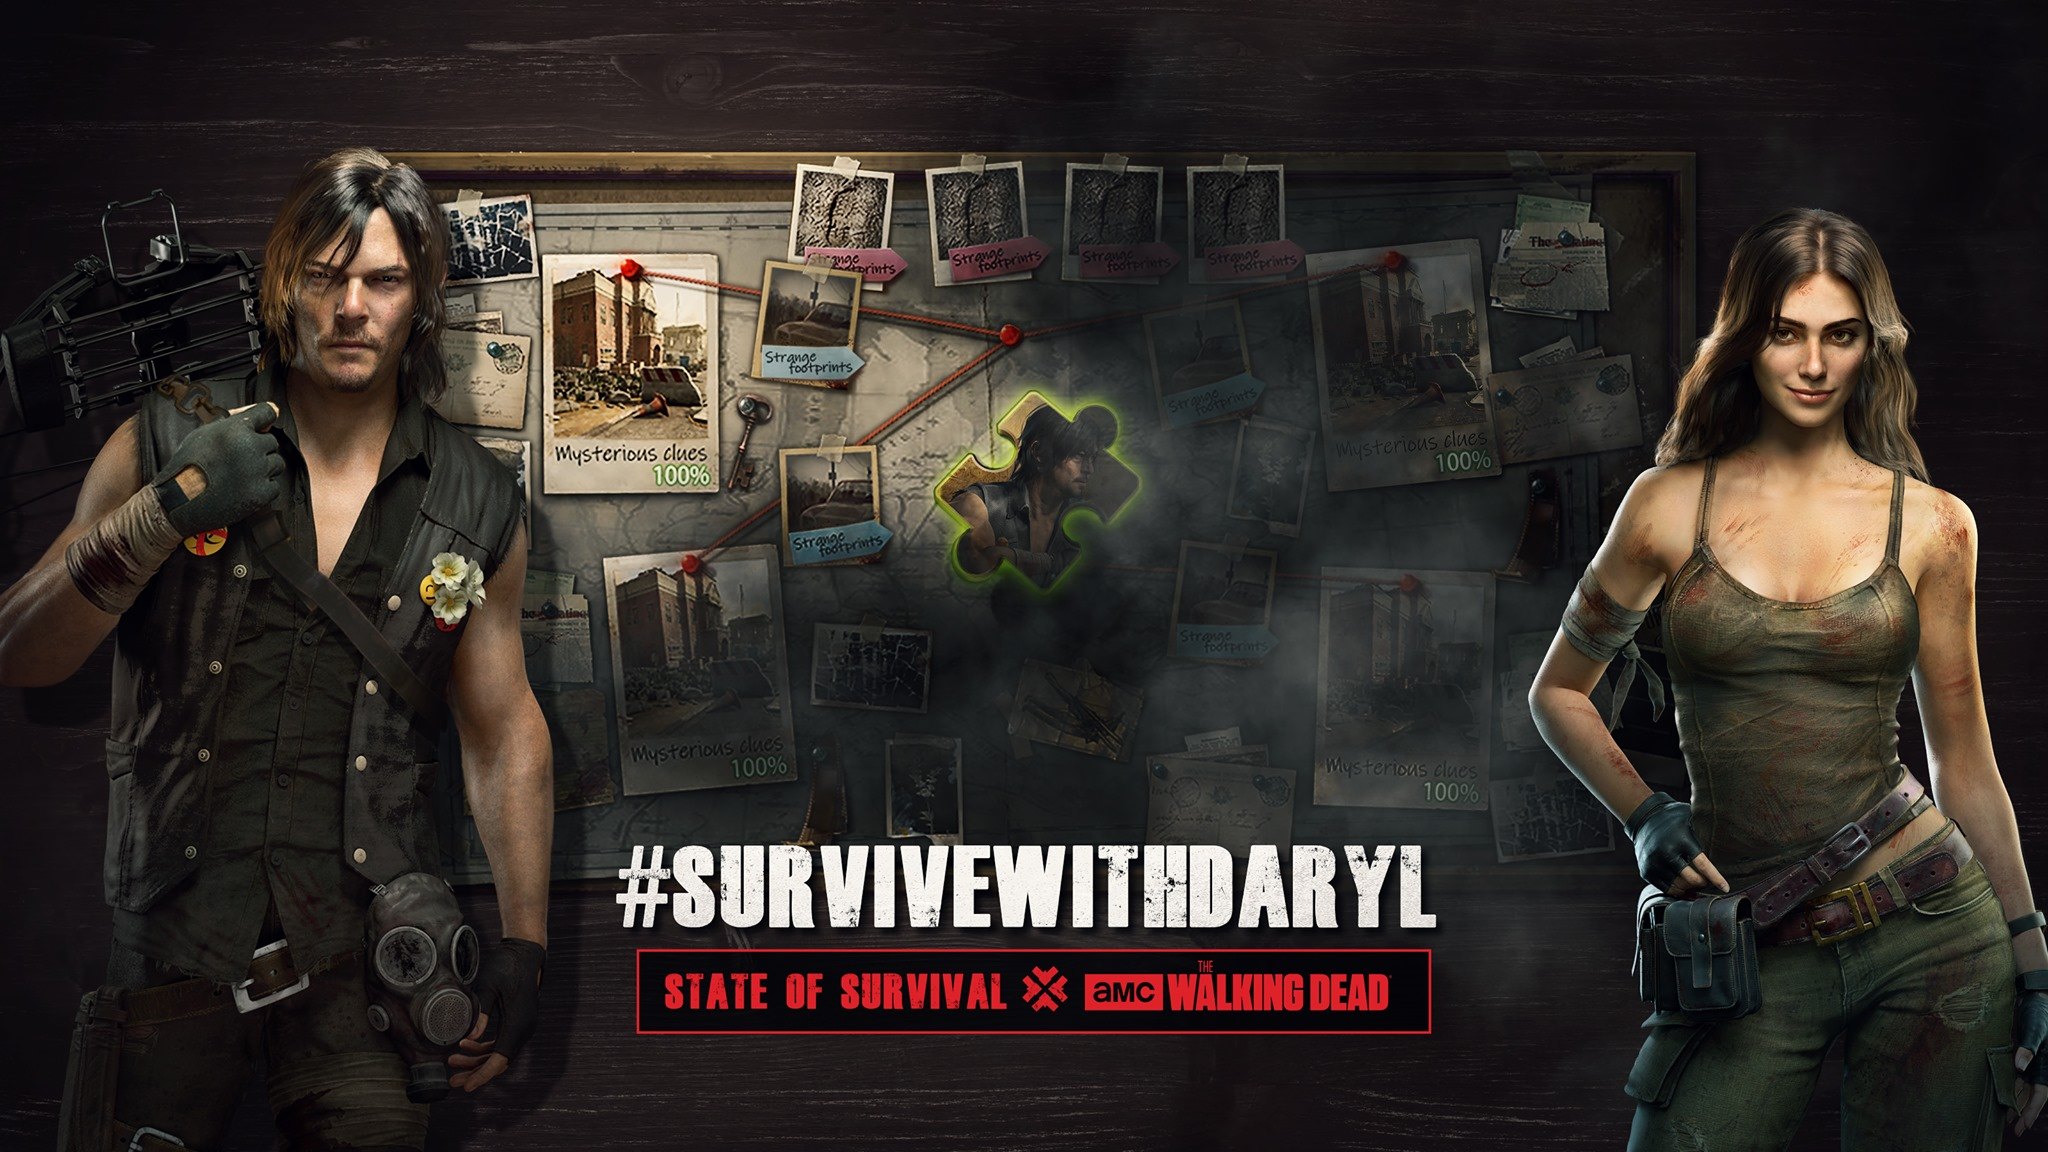 State of Survival add The Walking Dead’s Daryl character to the game in latest collaboration